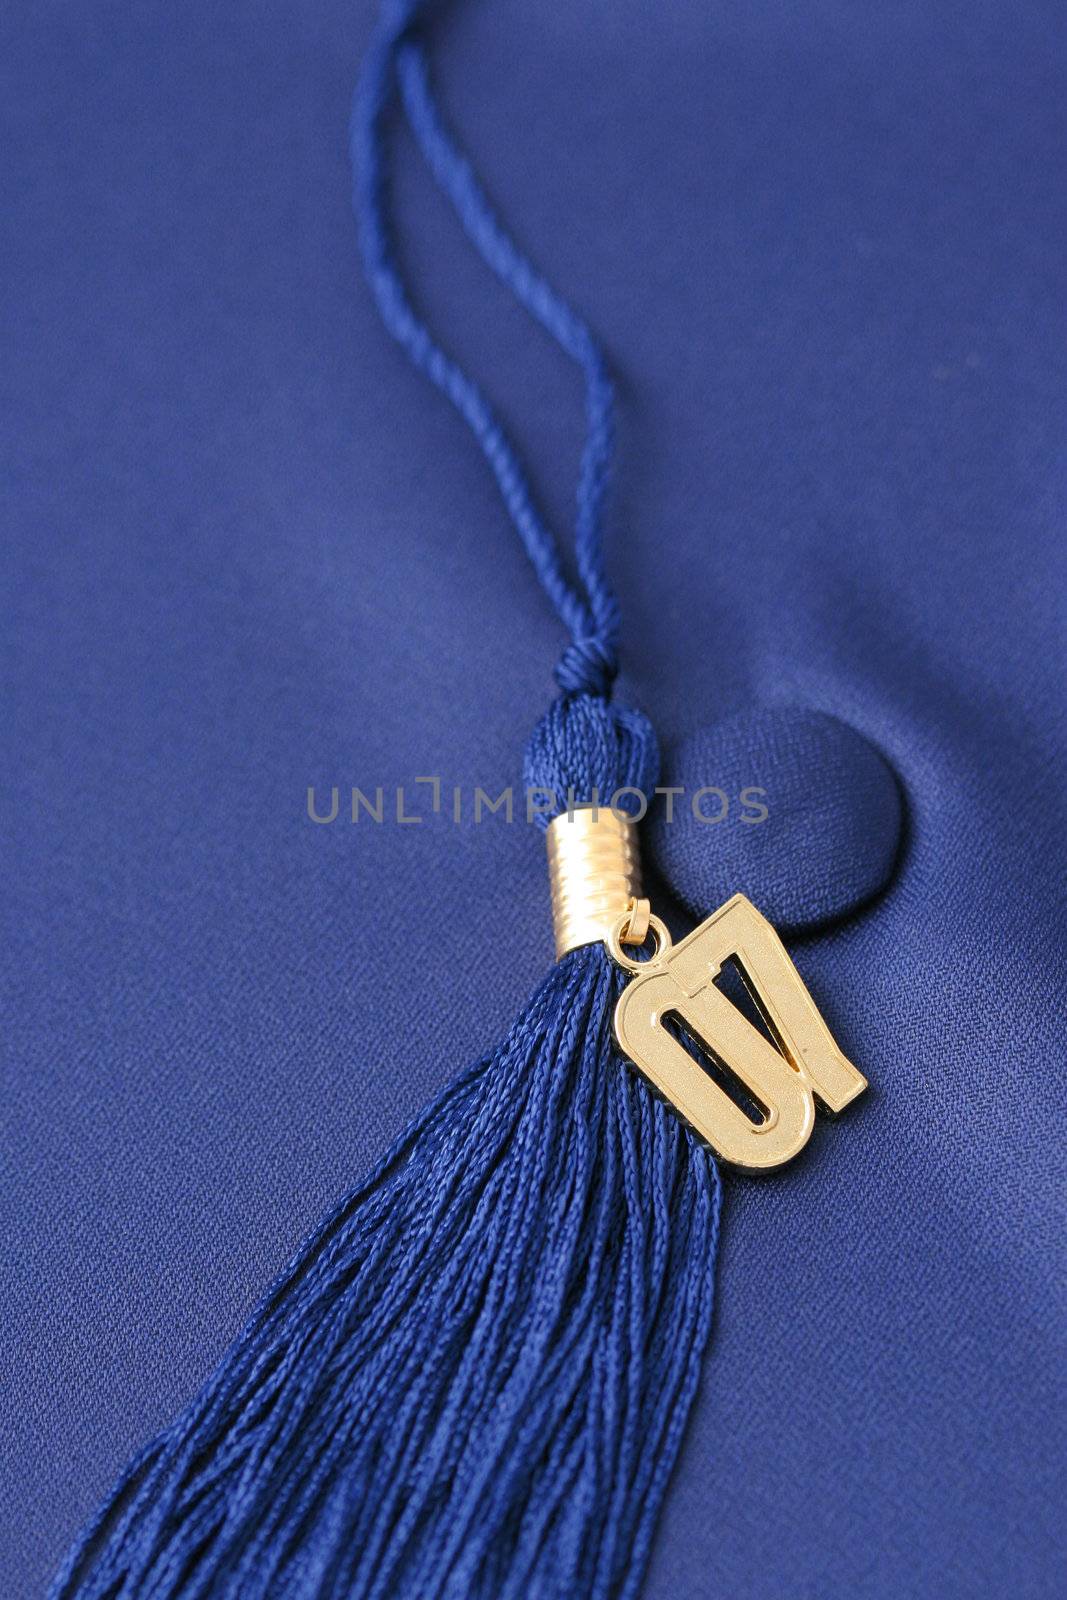 Graduation cap and tassle with a gold '07 attached.